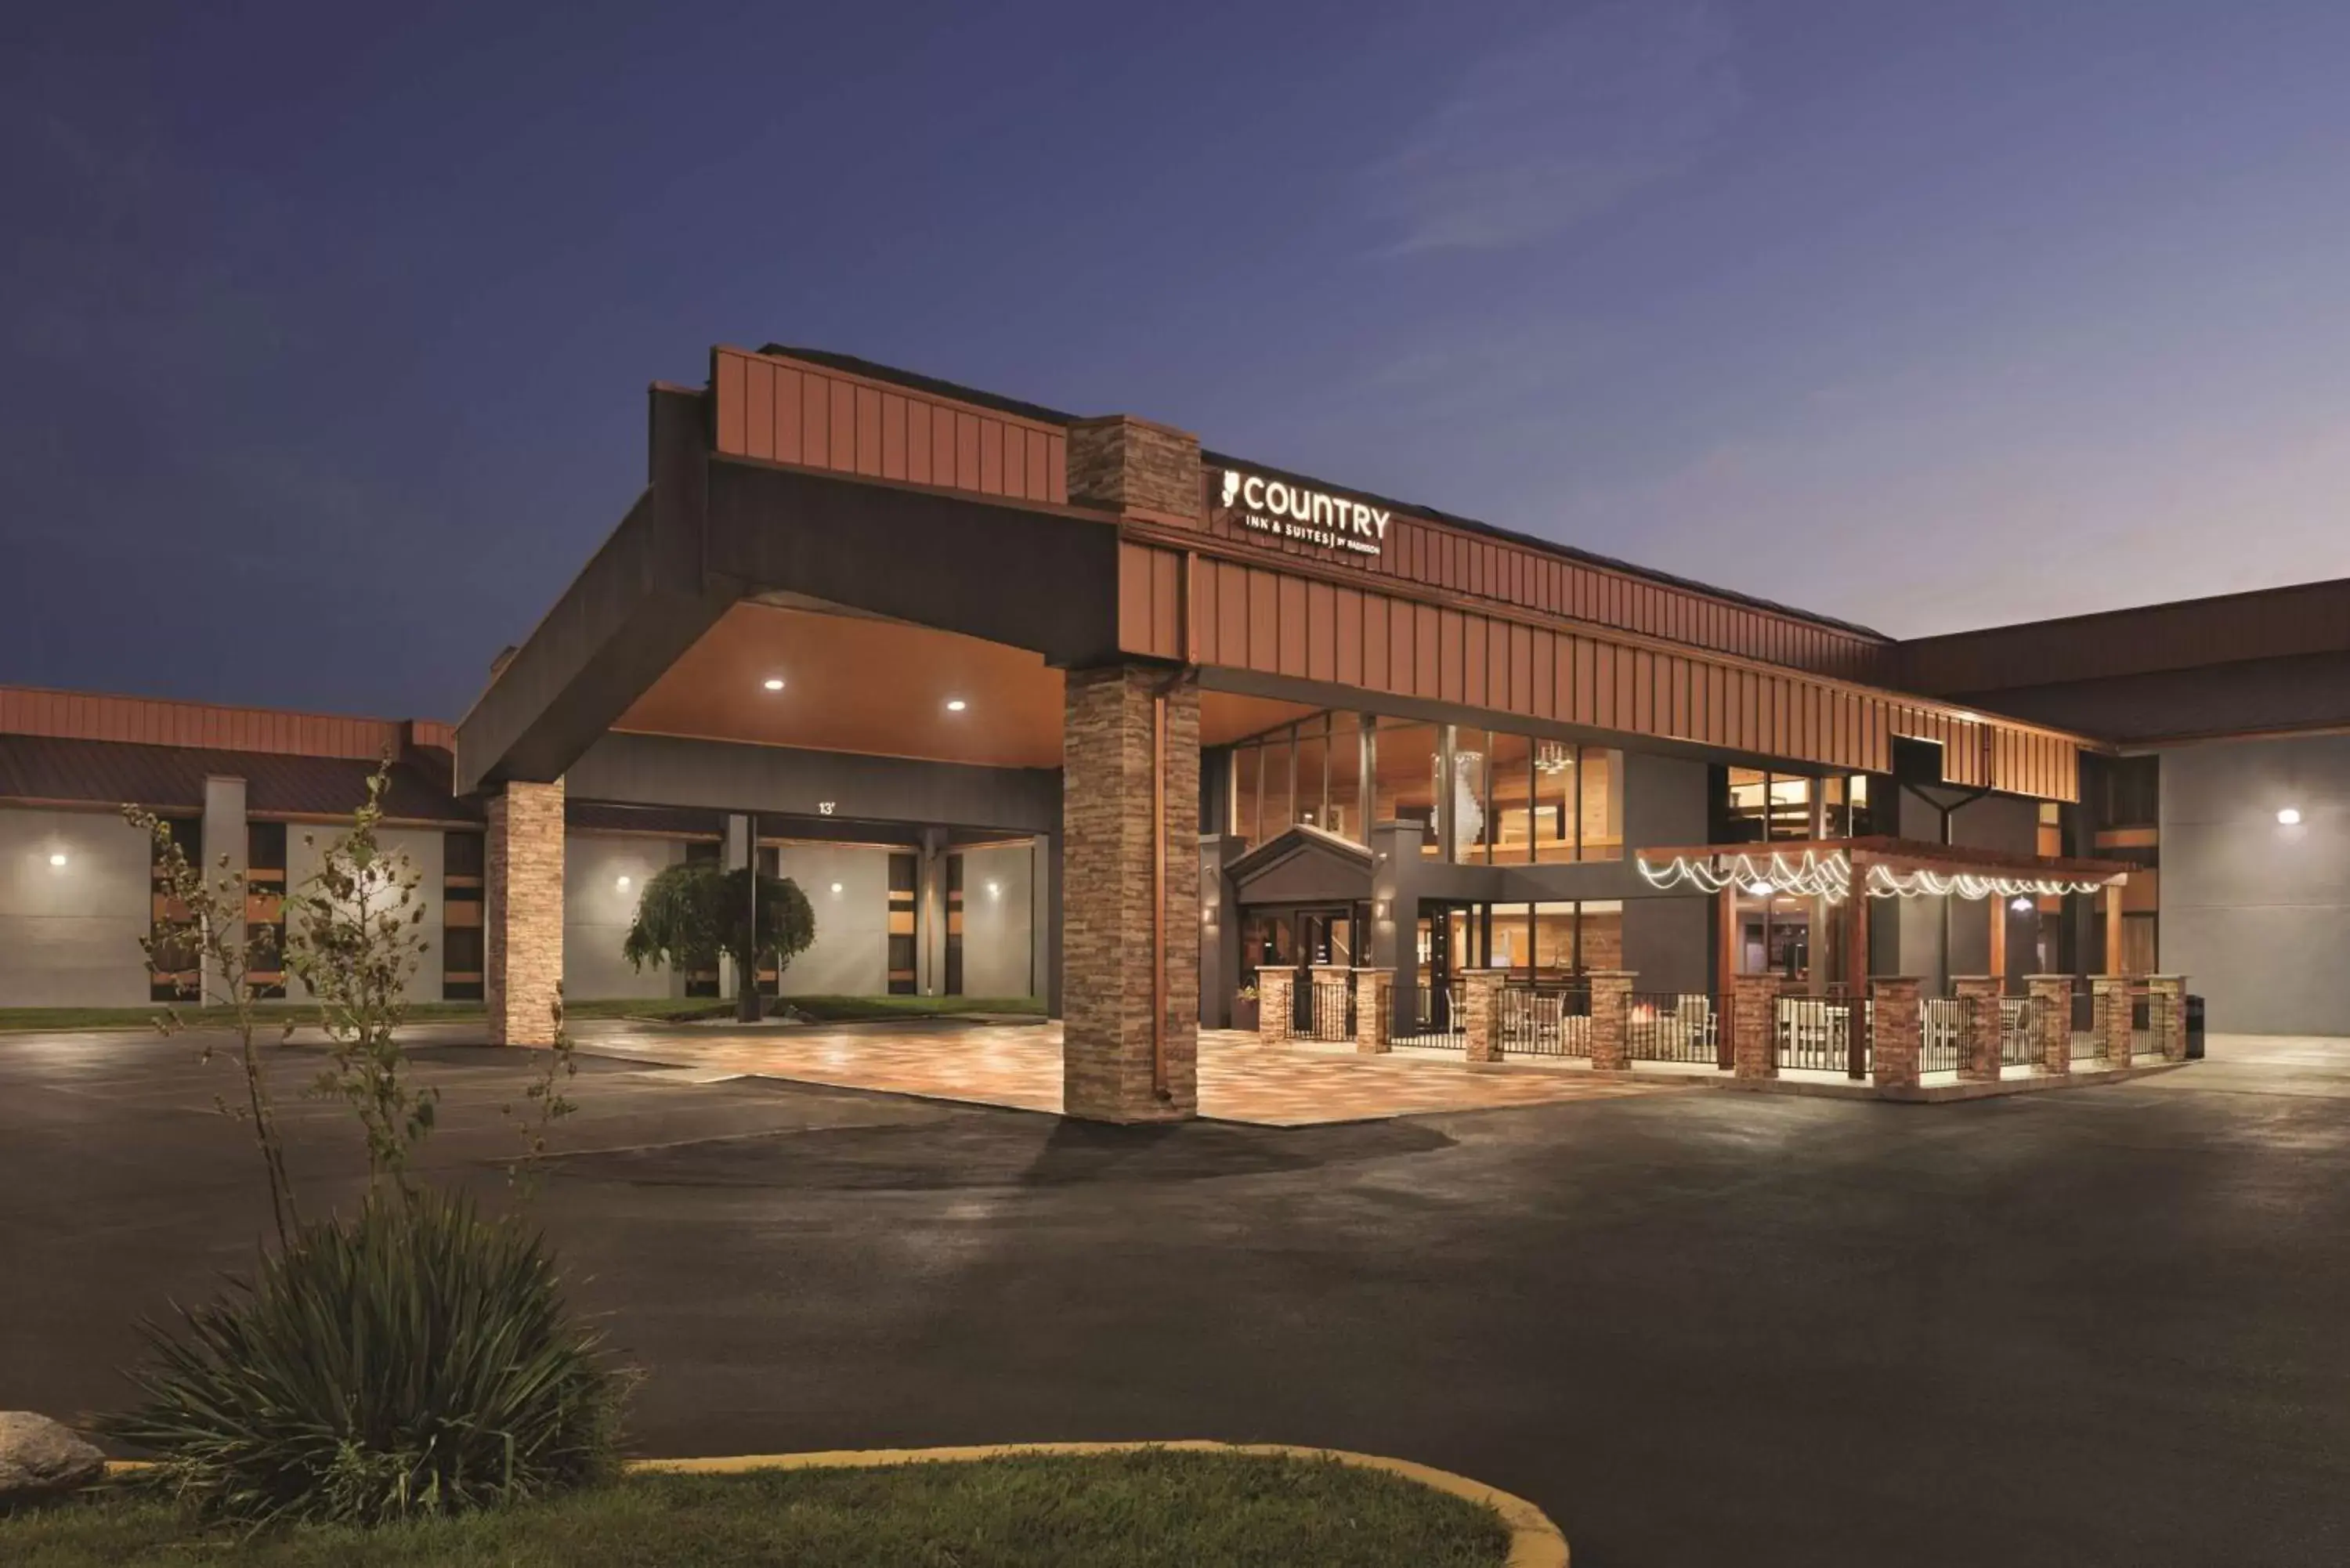 Property Building in Country Inn & Suites by Radisson, Indianapolis East, IN